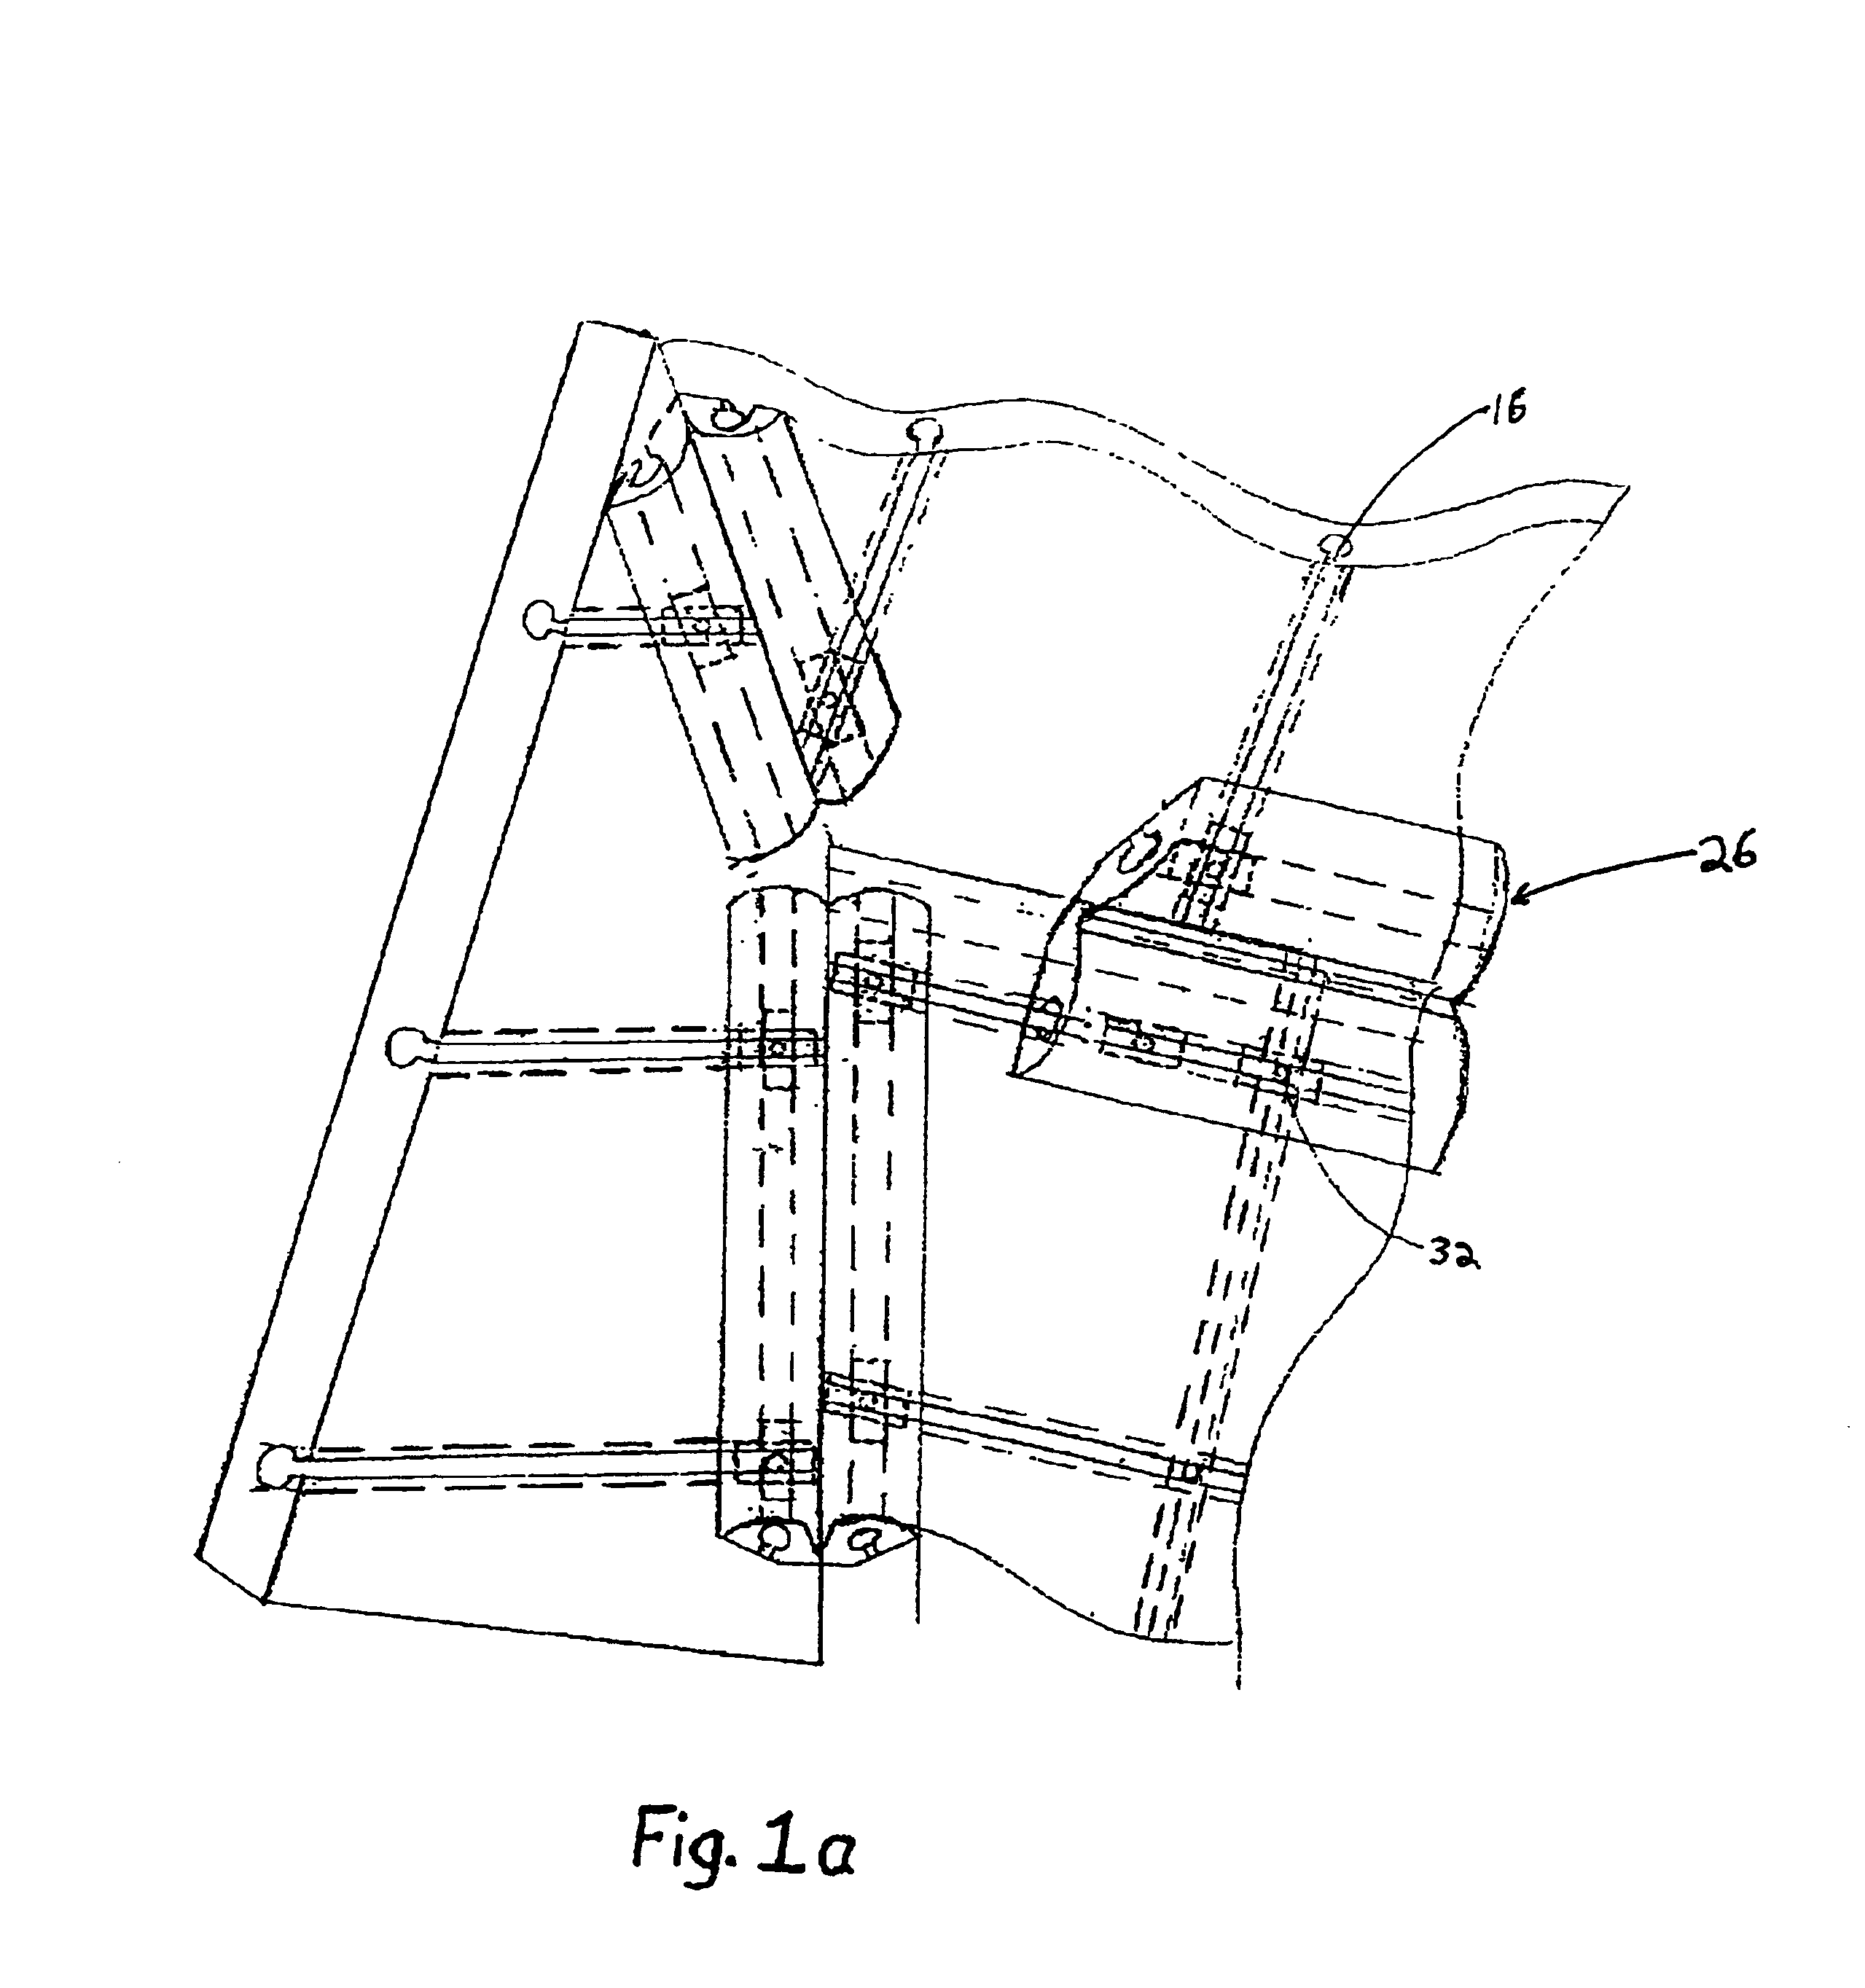 Method and apparatus for providing a modular storage system